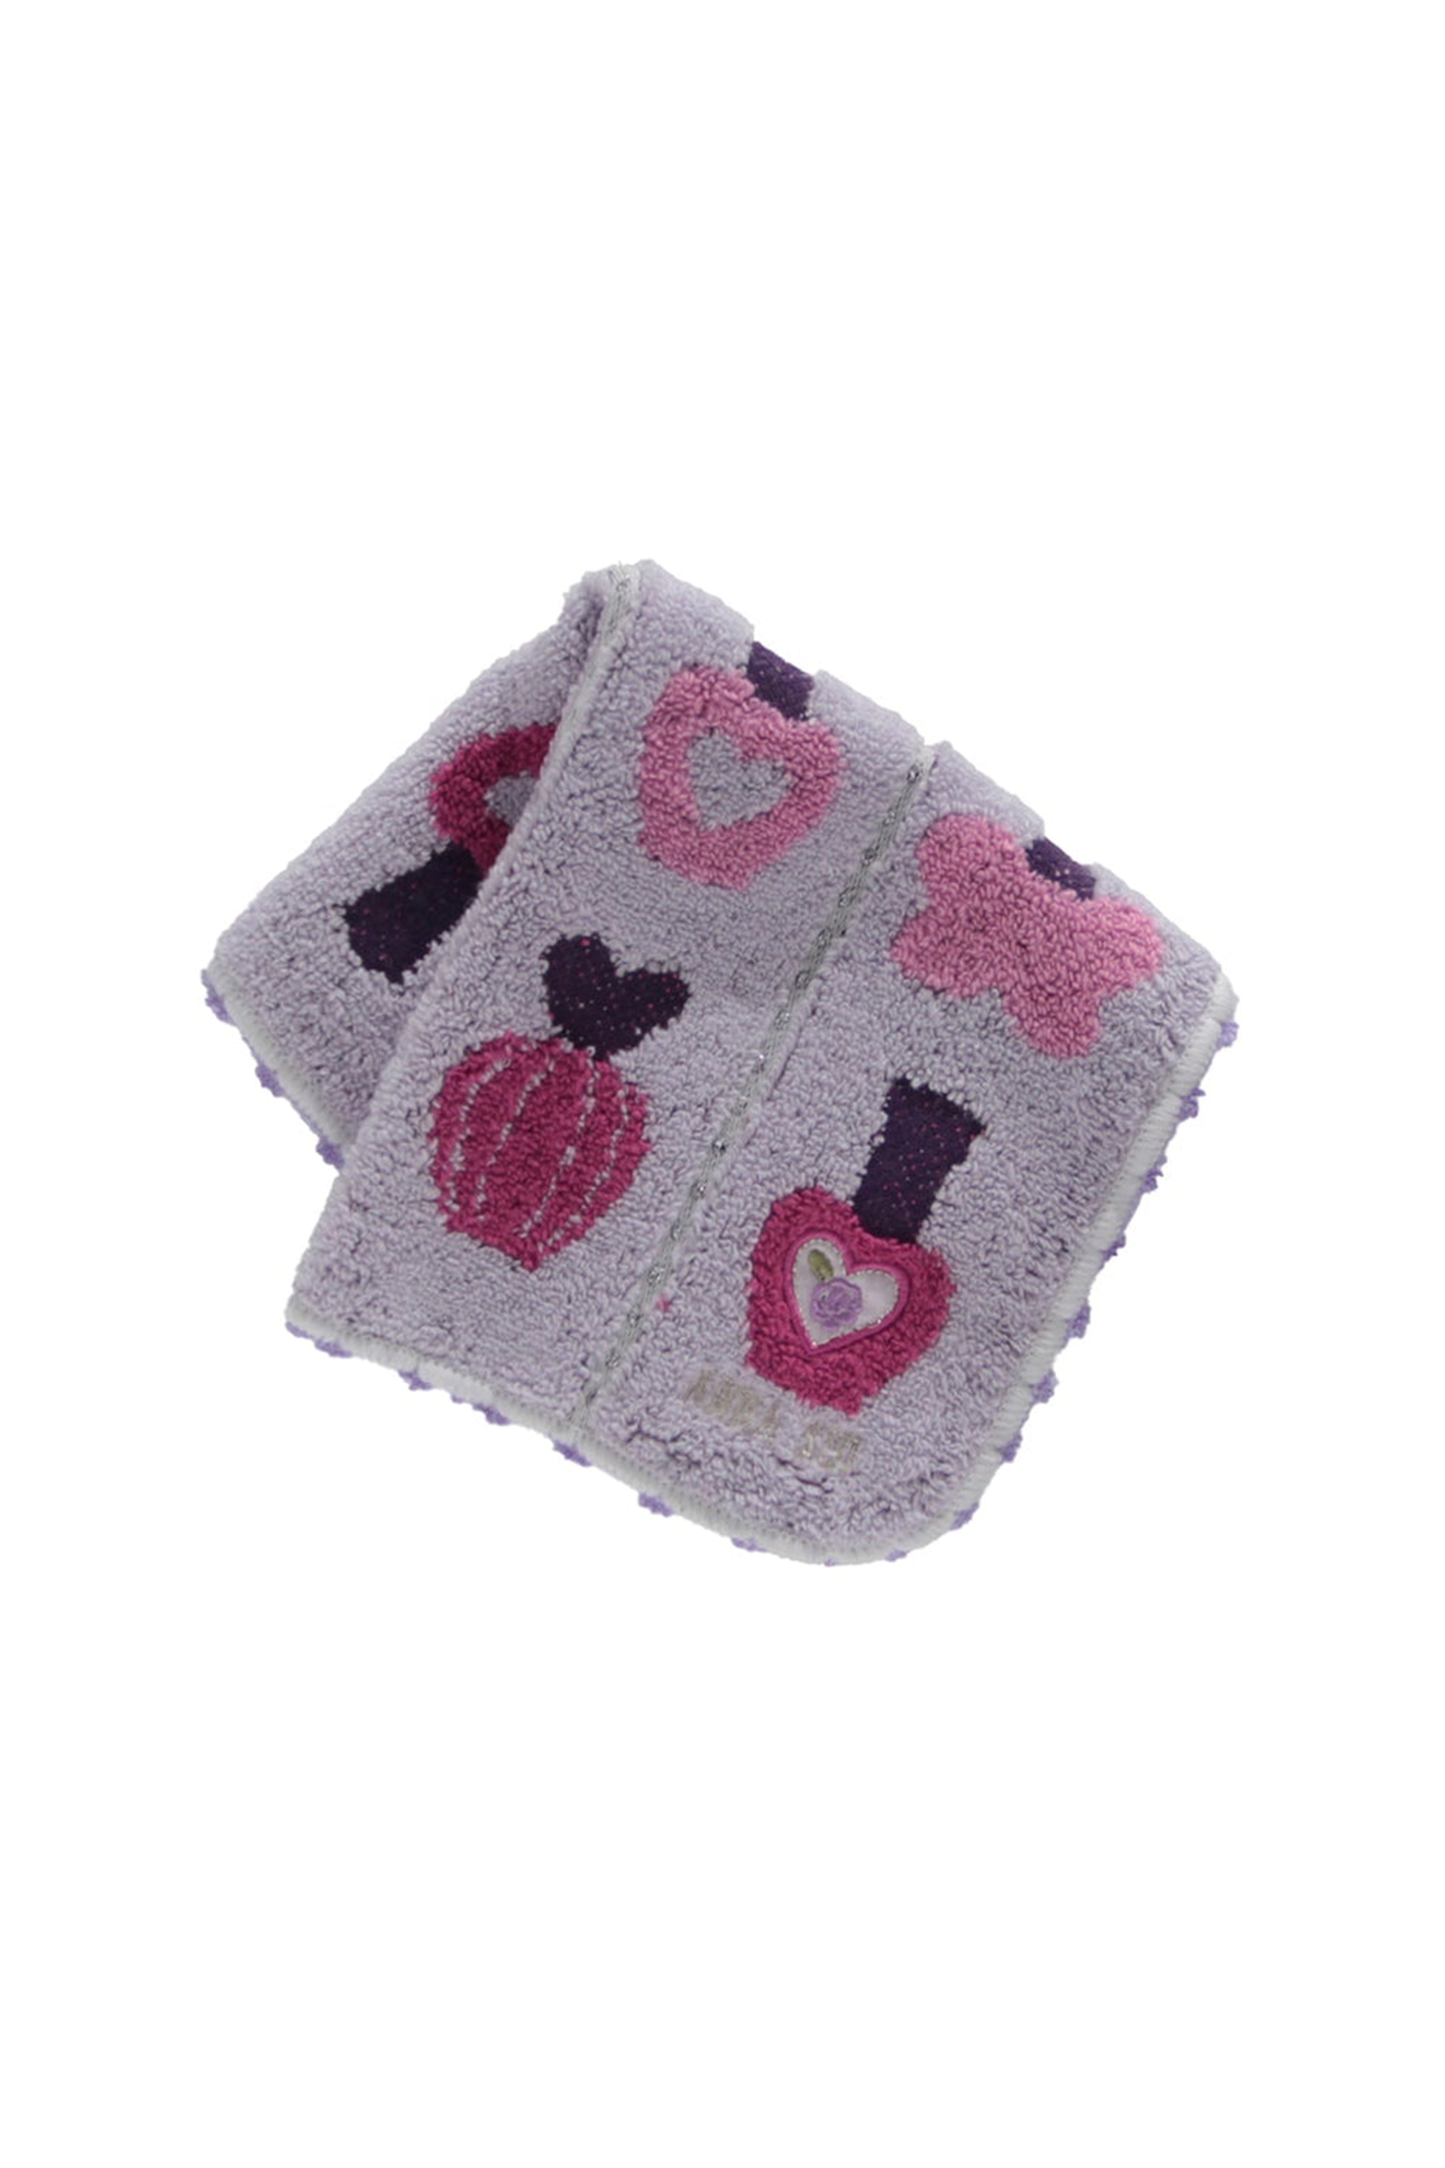 Washcloth, light purple, with lines of Nail Polish design bottles, Anna Sui label in the corner